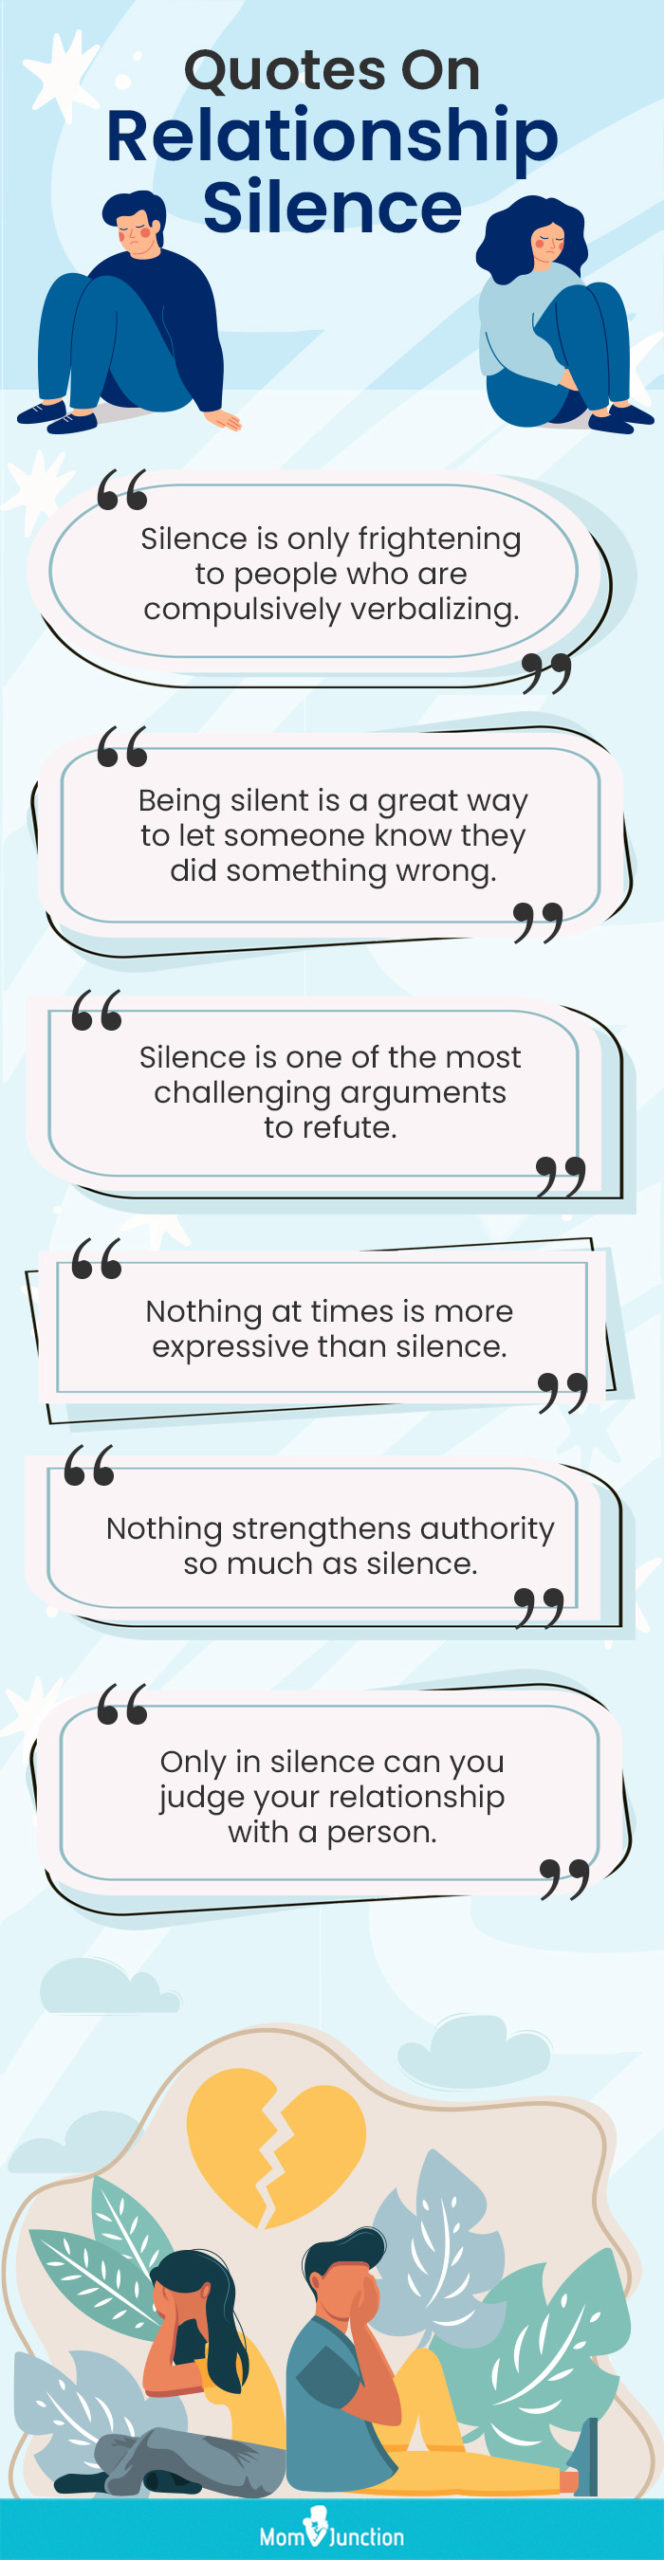 Silence has so much meaning. - Quote